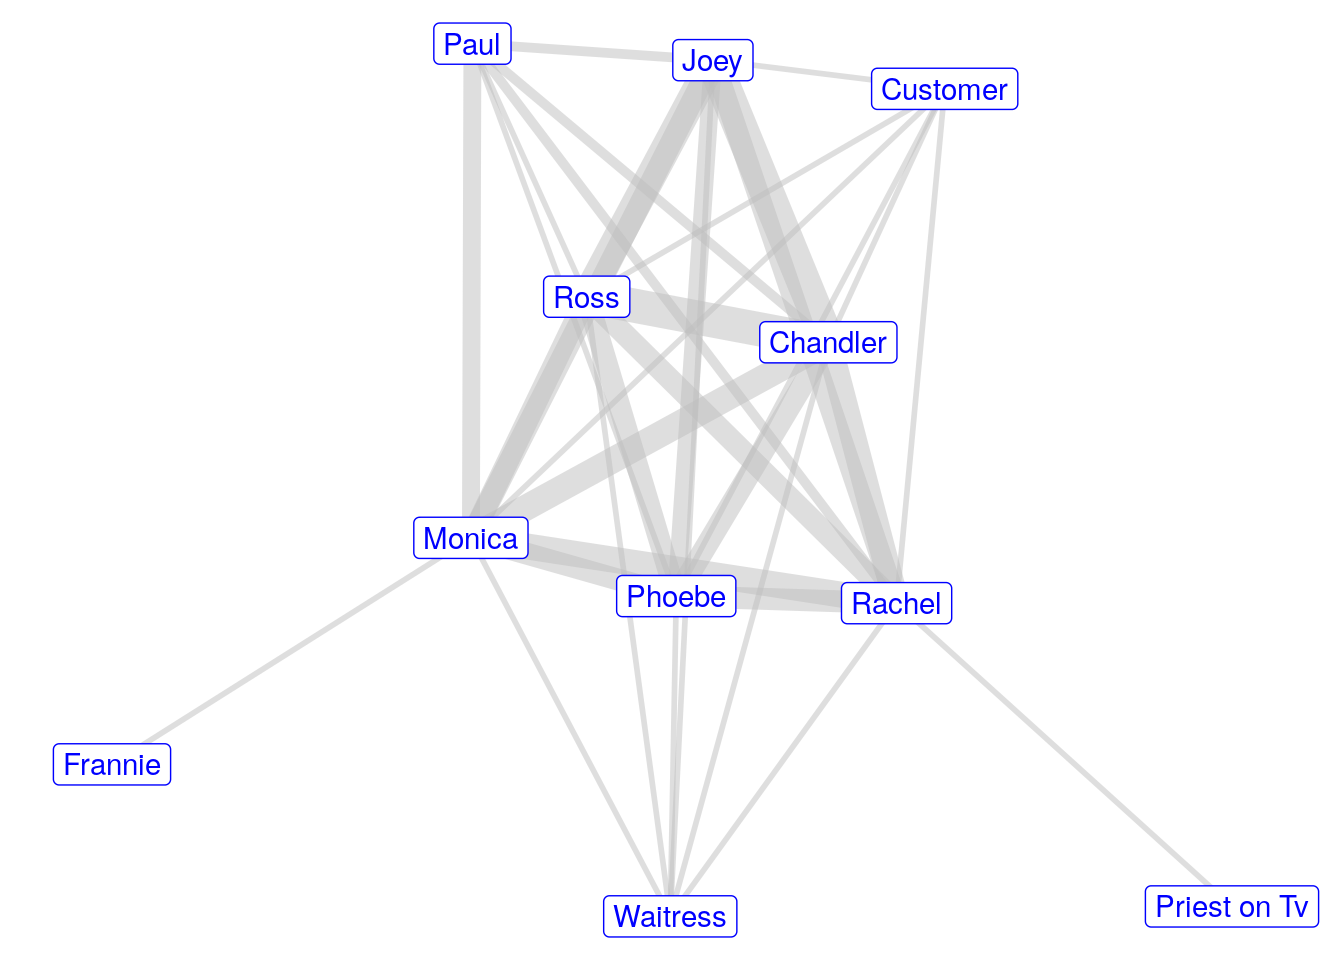 Visualization of the network of characters in Episode 1 of <i>Friends</i>, based on characters speaking in the same scene together